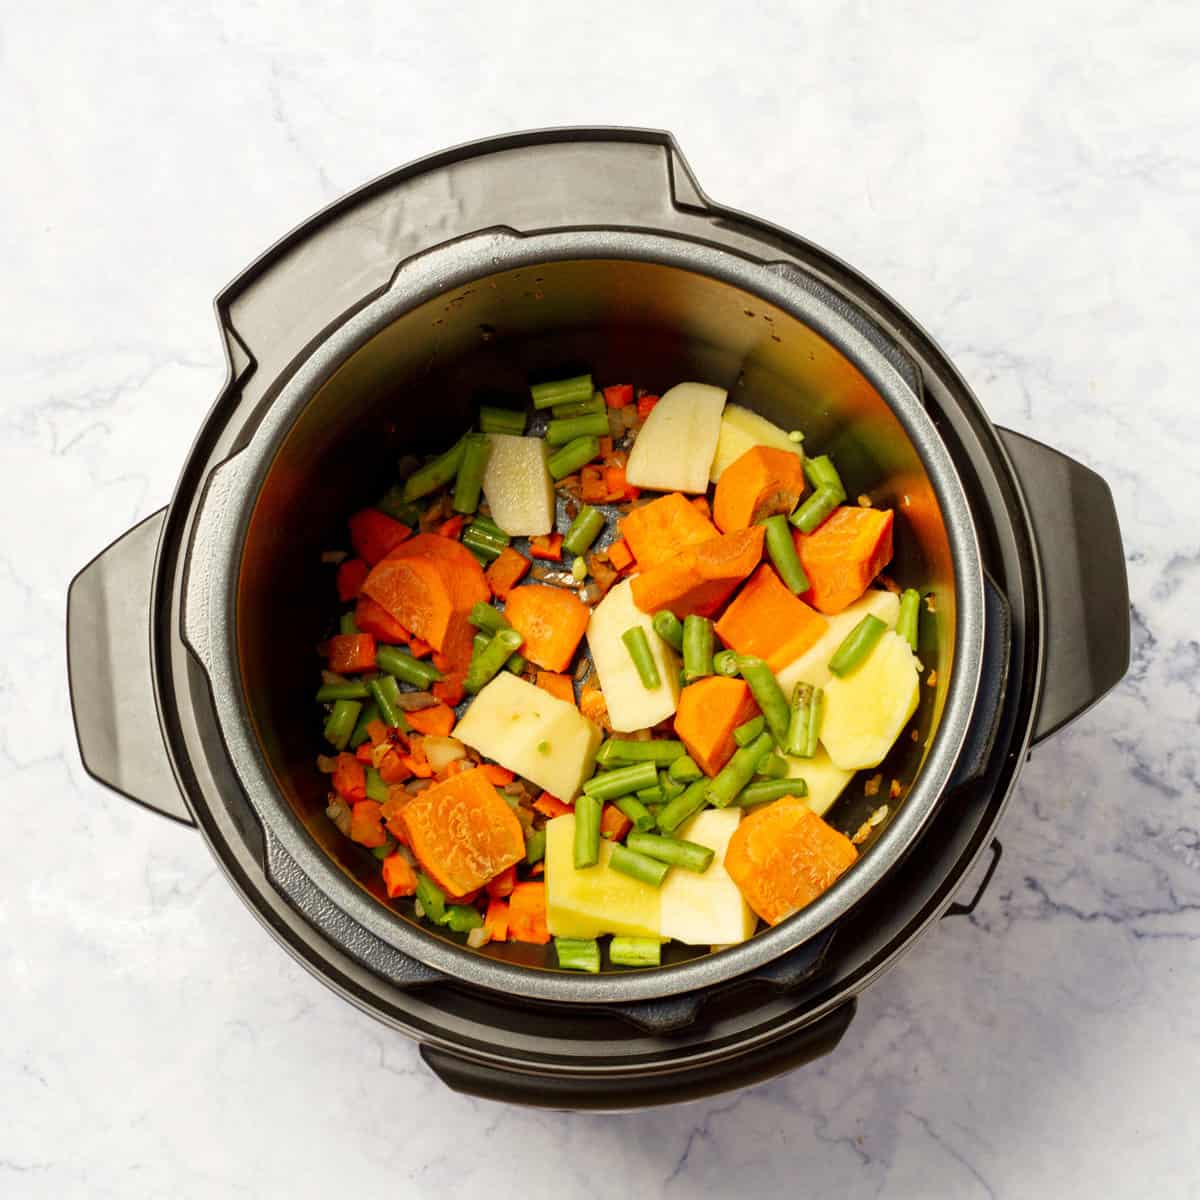 carrots, peas, green beans, and red bell peppers in instant pot